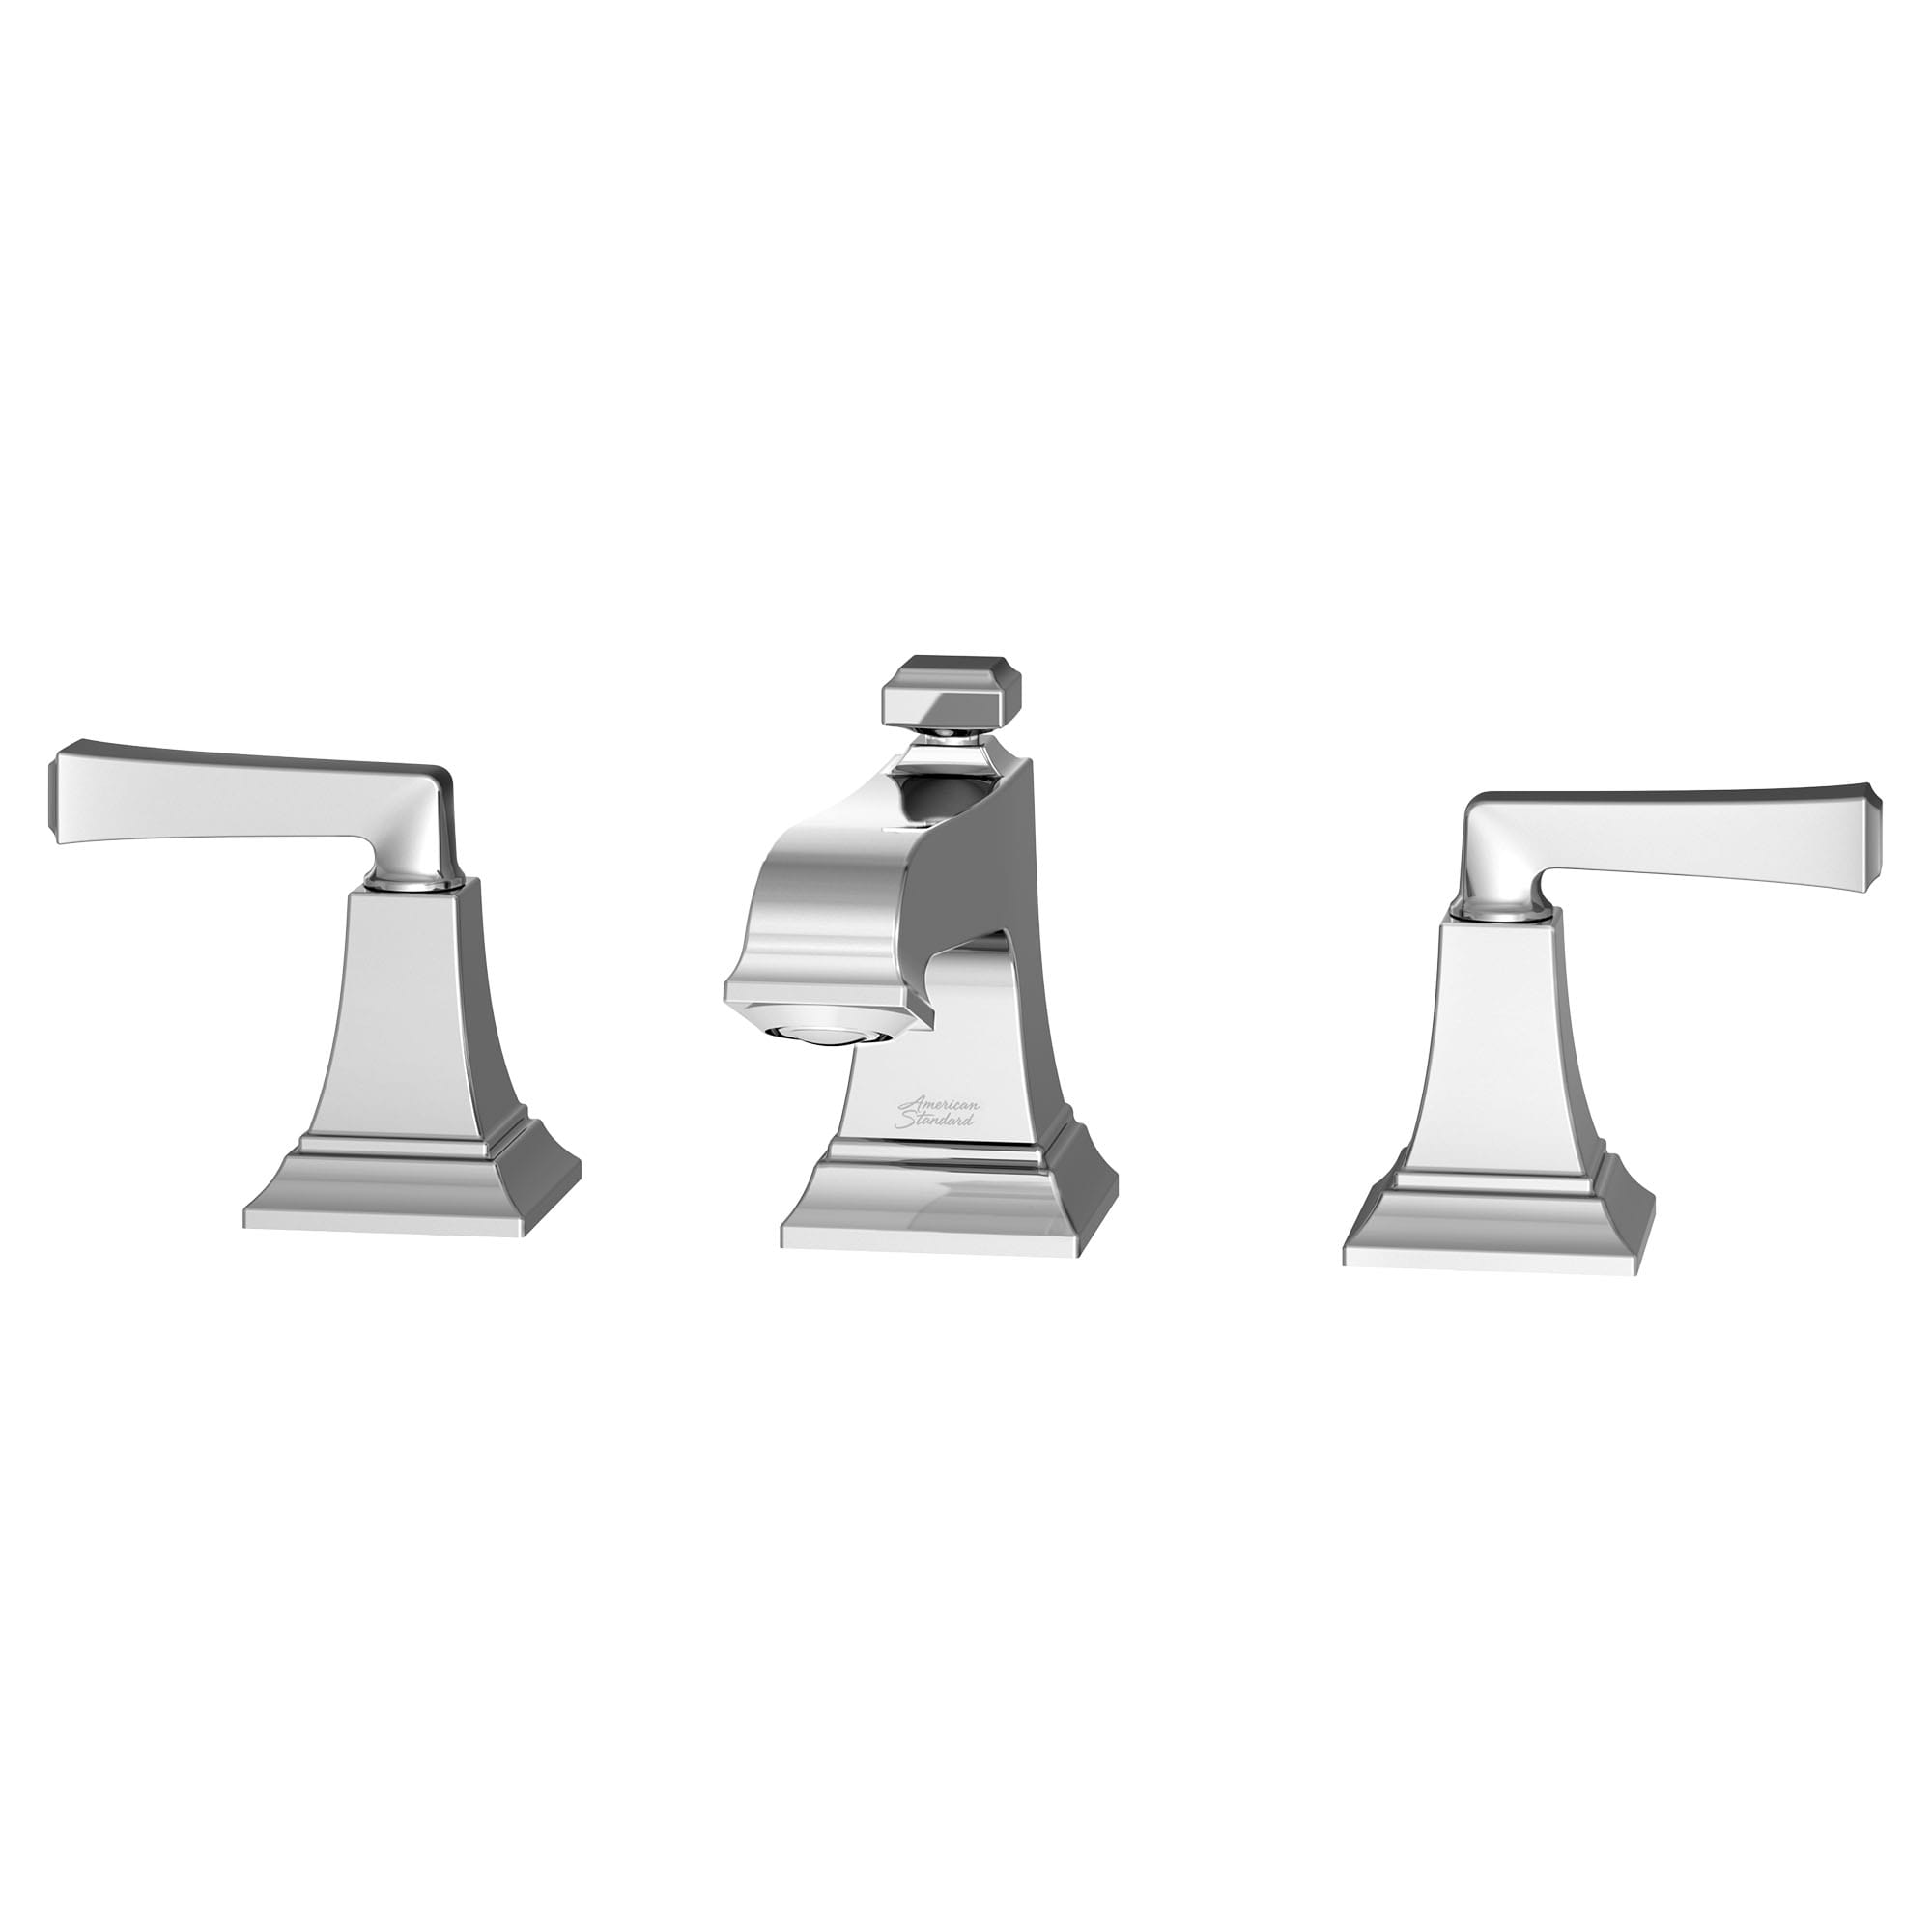 Town Square S 8 Inch Widespread 2 Handle Bathroom Faucet 12 gpm 45 L min With Lever Handles CHROME